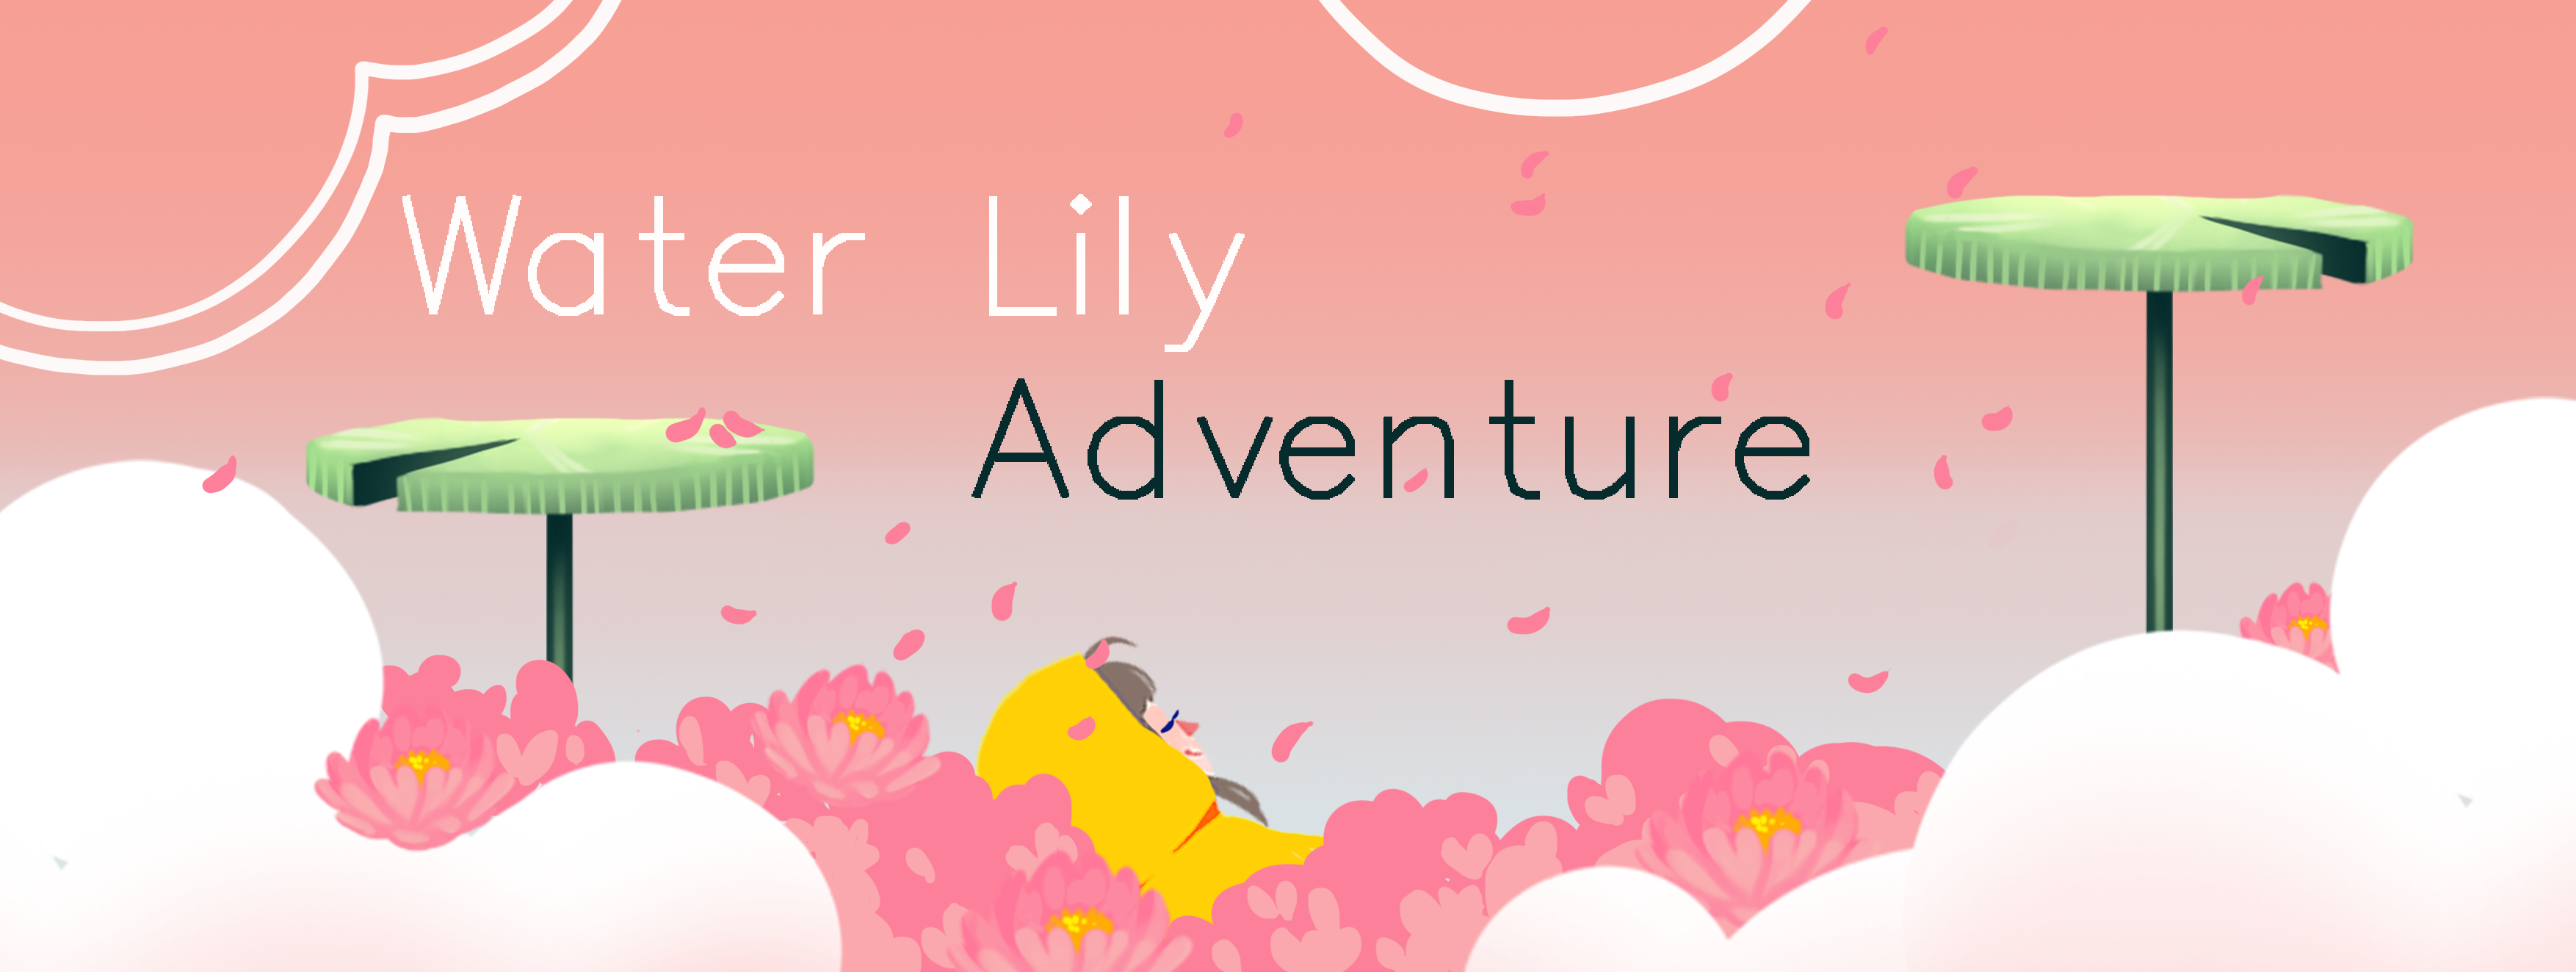 Water Lily Adventure